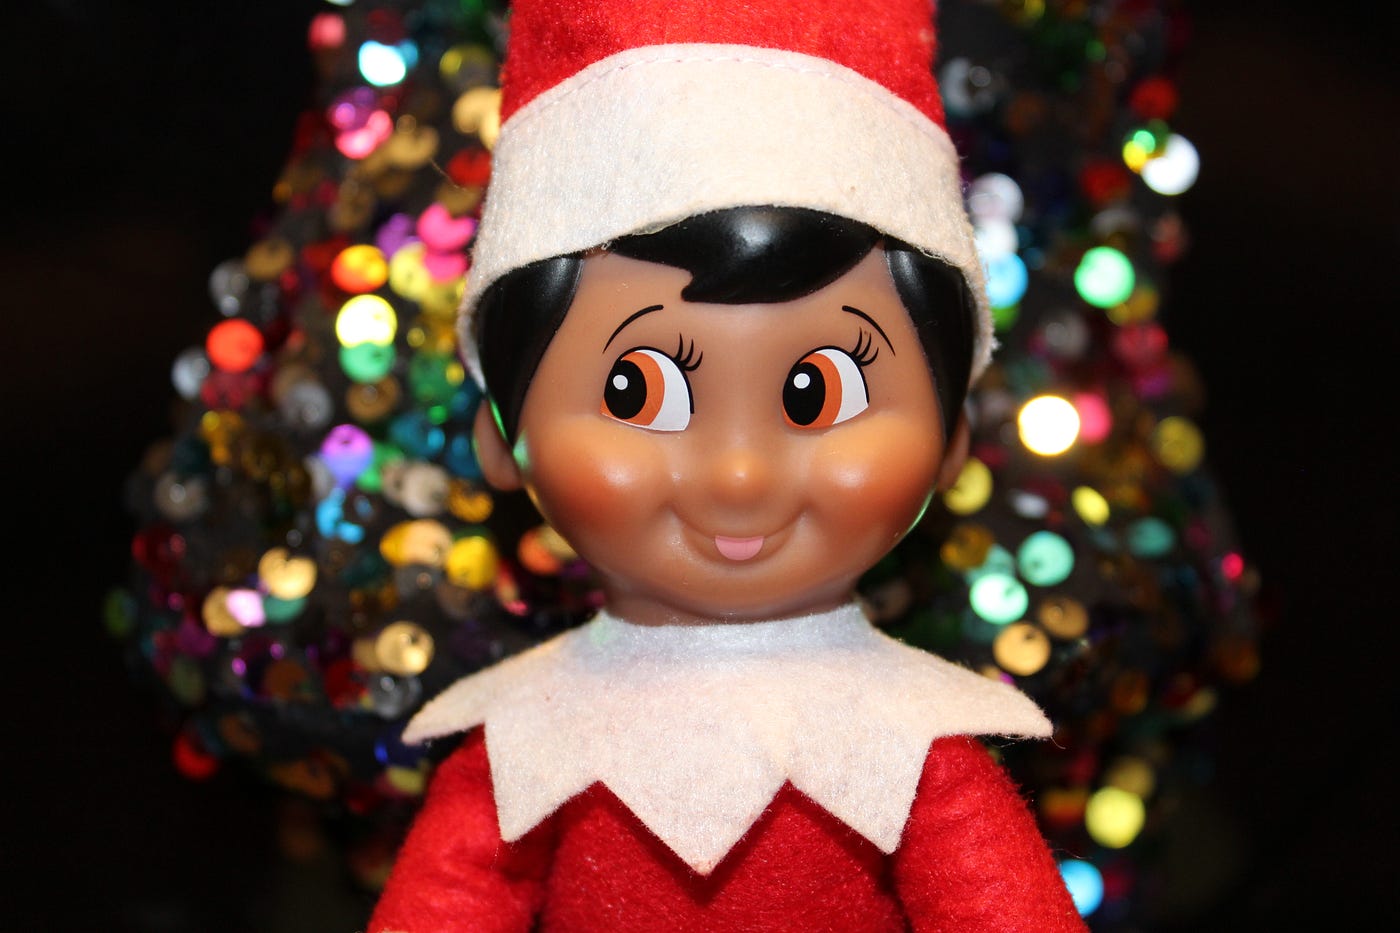 Where Did This “Elf on the Shelf” Come From?, by Jeffrey Clos, Evolve